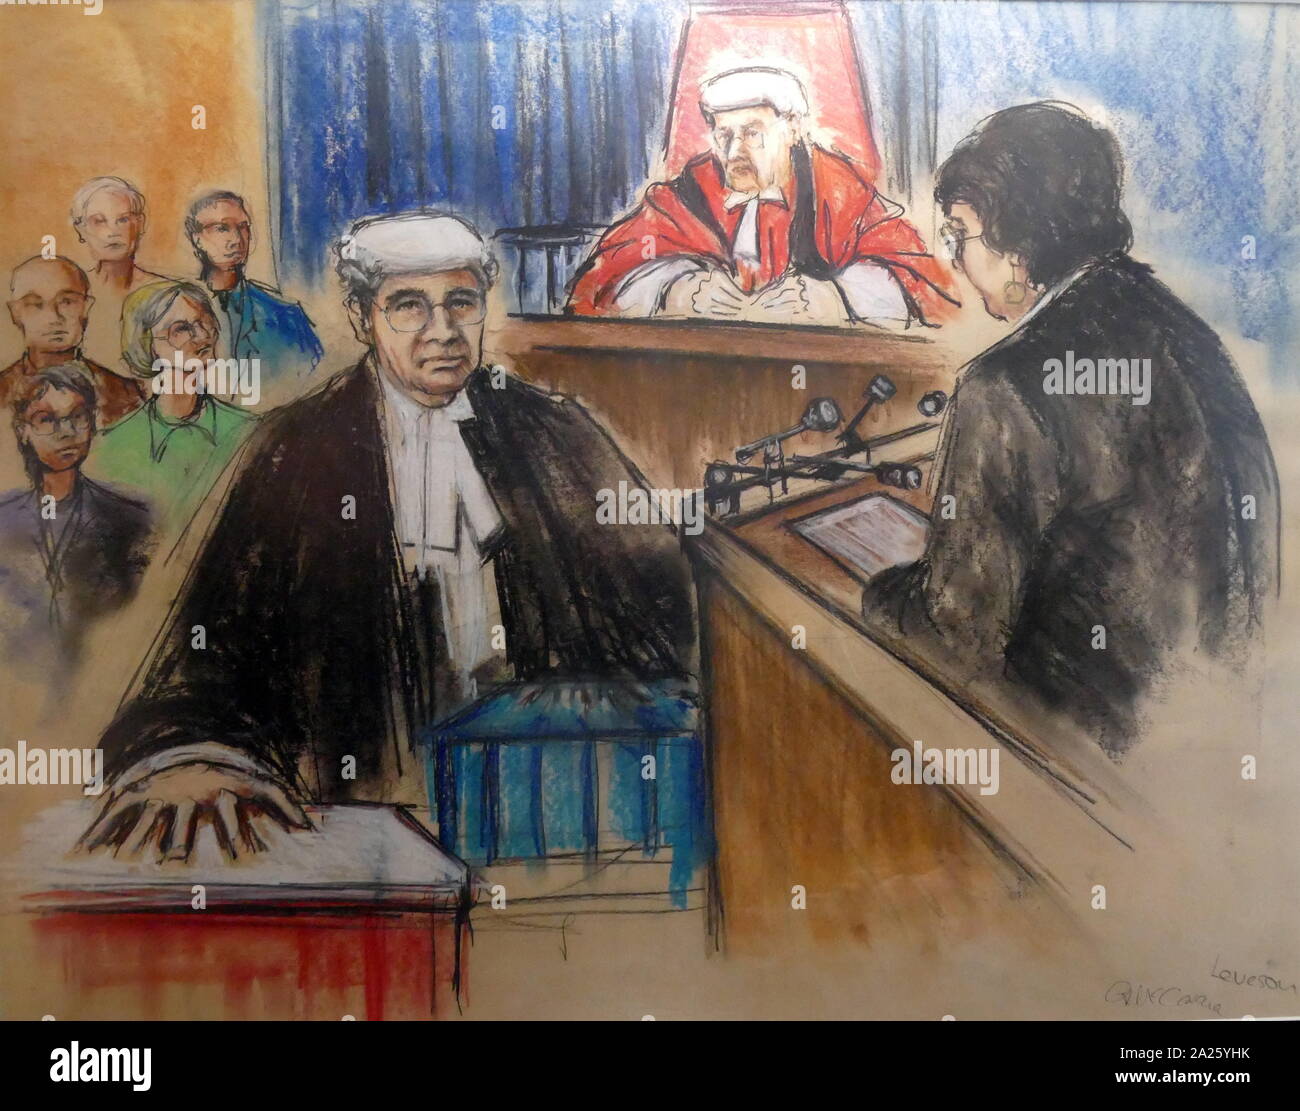 Supreme Court artist retires after 45 years documenting judicial history   NPR